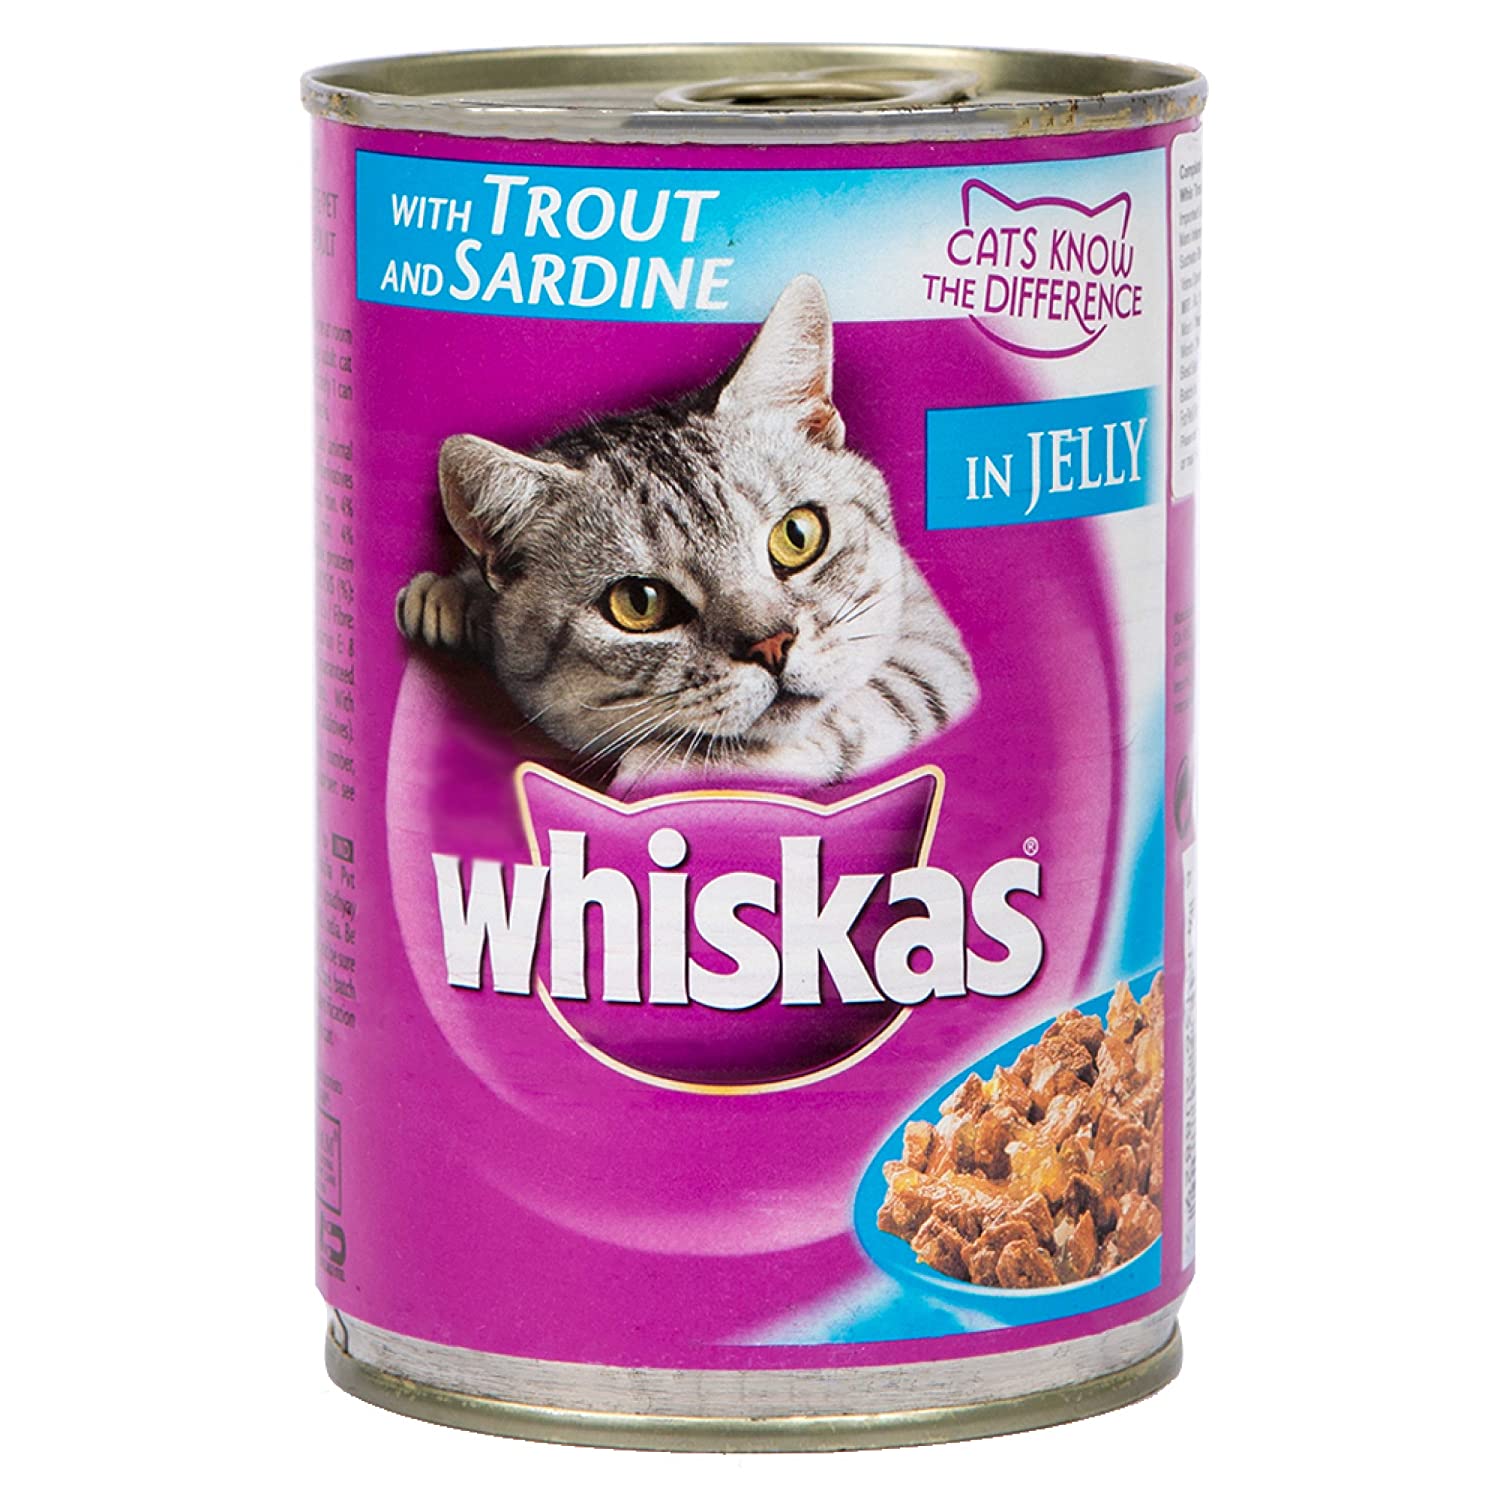 Whiskas - With Trout and Sardine in Jelly Tin